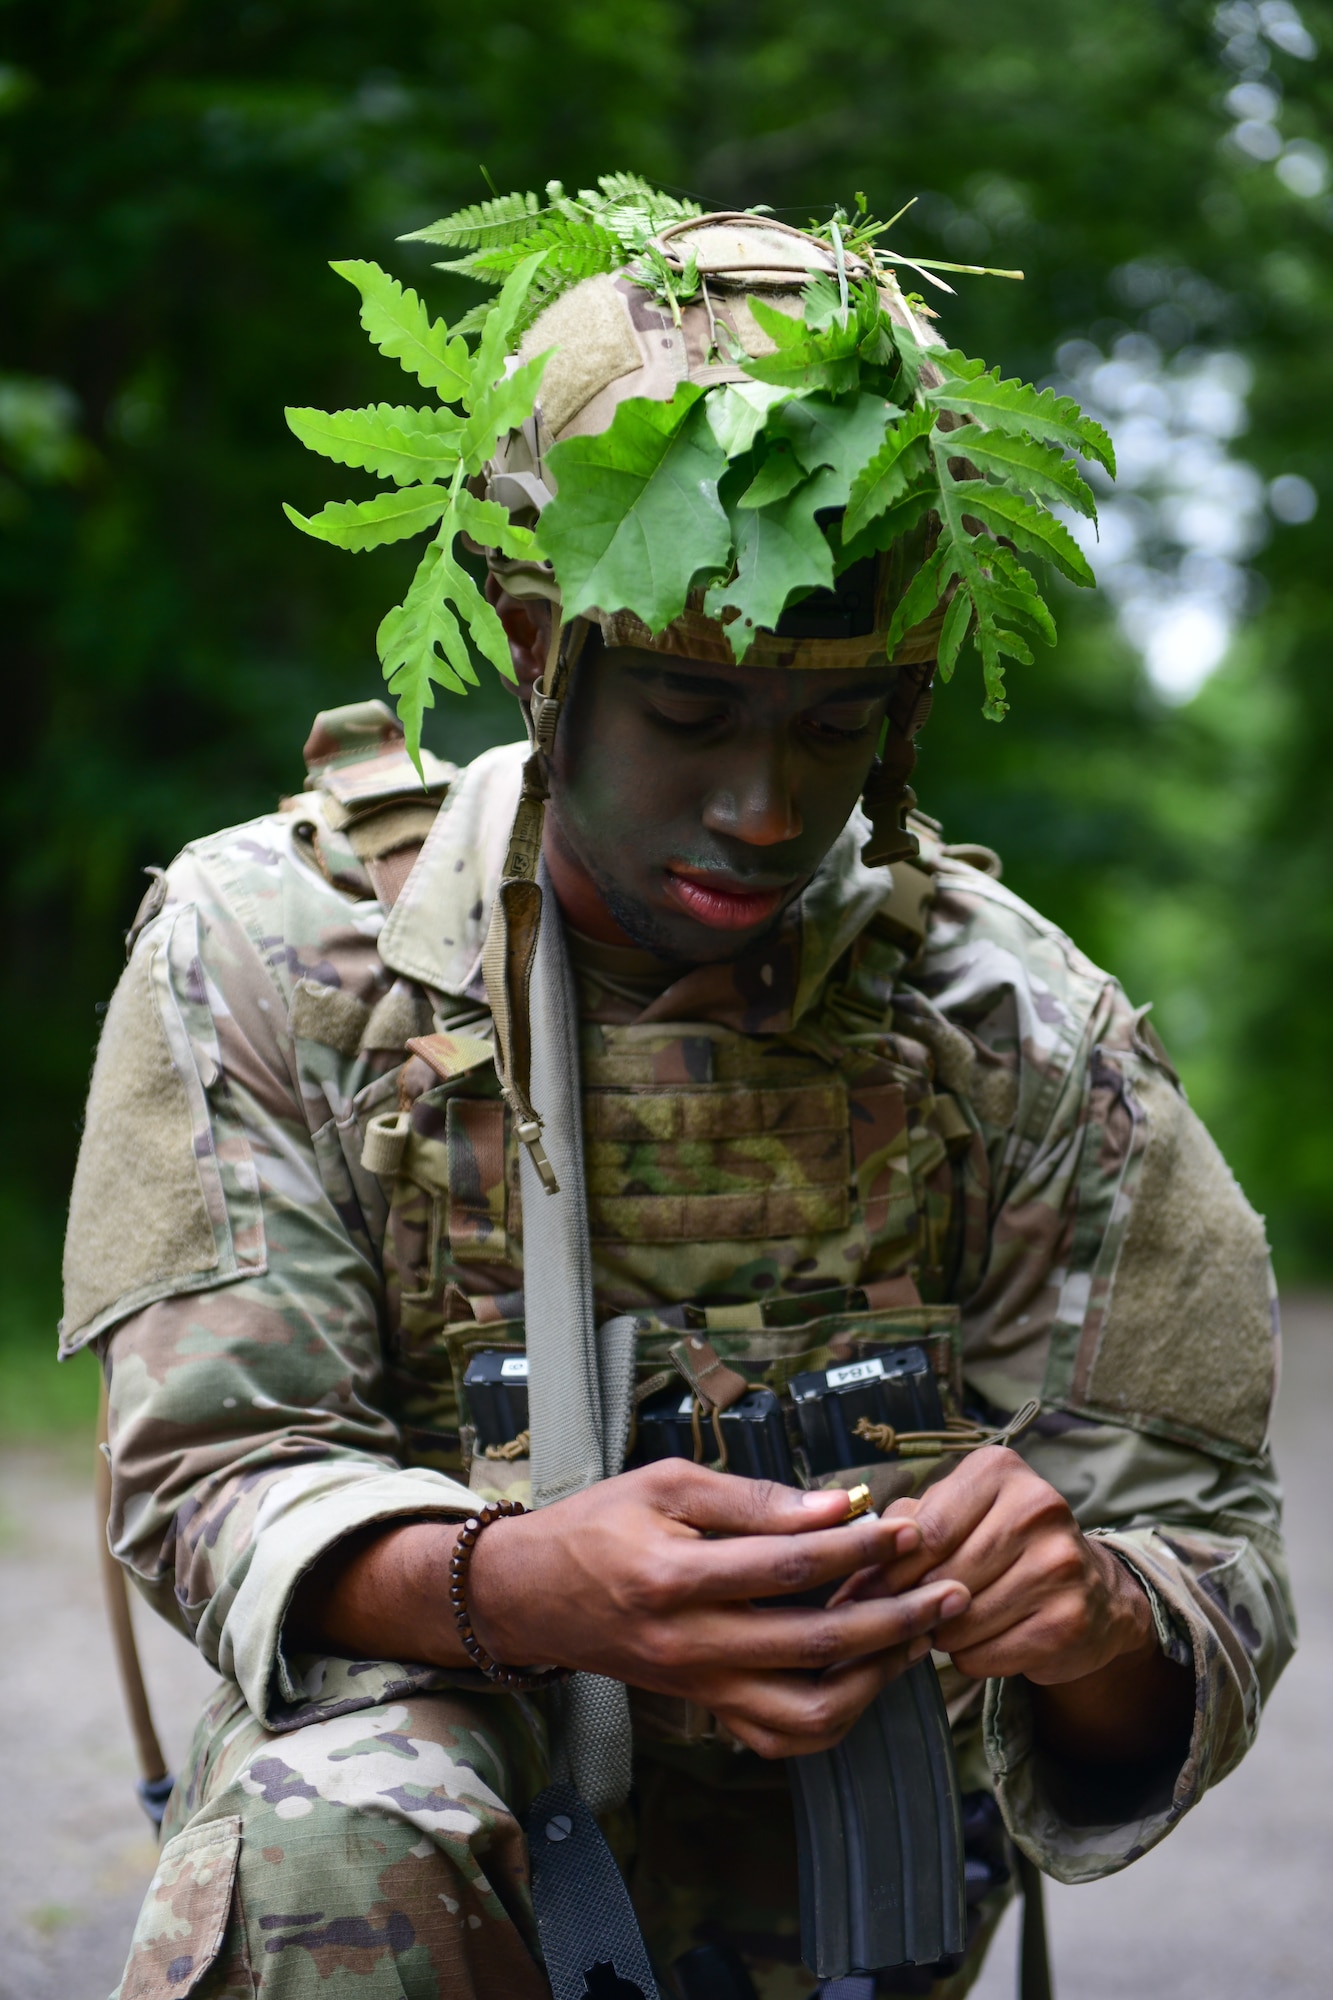 Airman 1st Class Tyven Poole, an Integrated Defense Leadership Course student assigned to the 927th Security Forces Squadron, MacDill Air Force Base, Florida, readies his gear at the start of an area security operations exercise at Camp James A. Garfield Joint Military Training Center, Ohio, July 27, 2022.